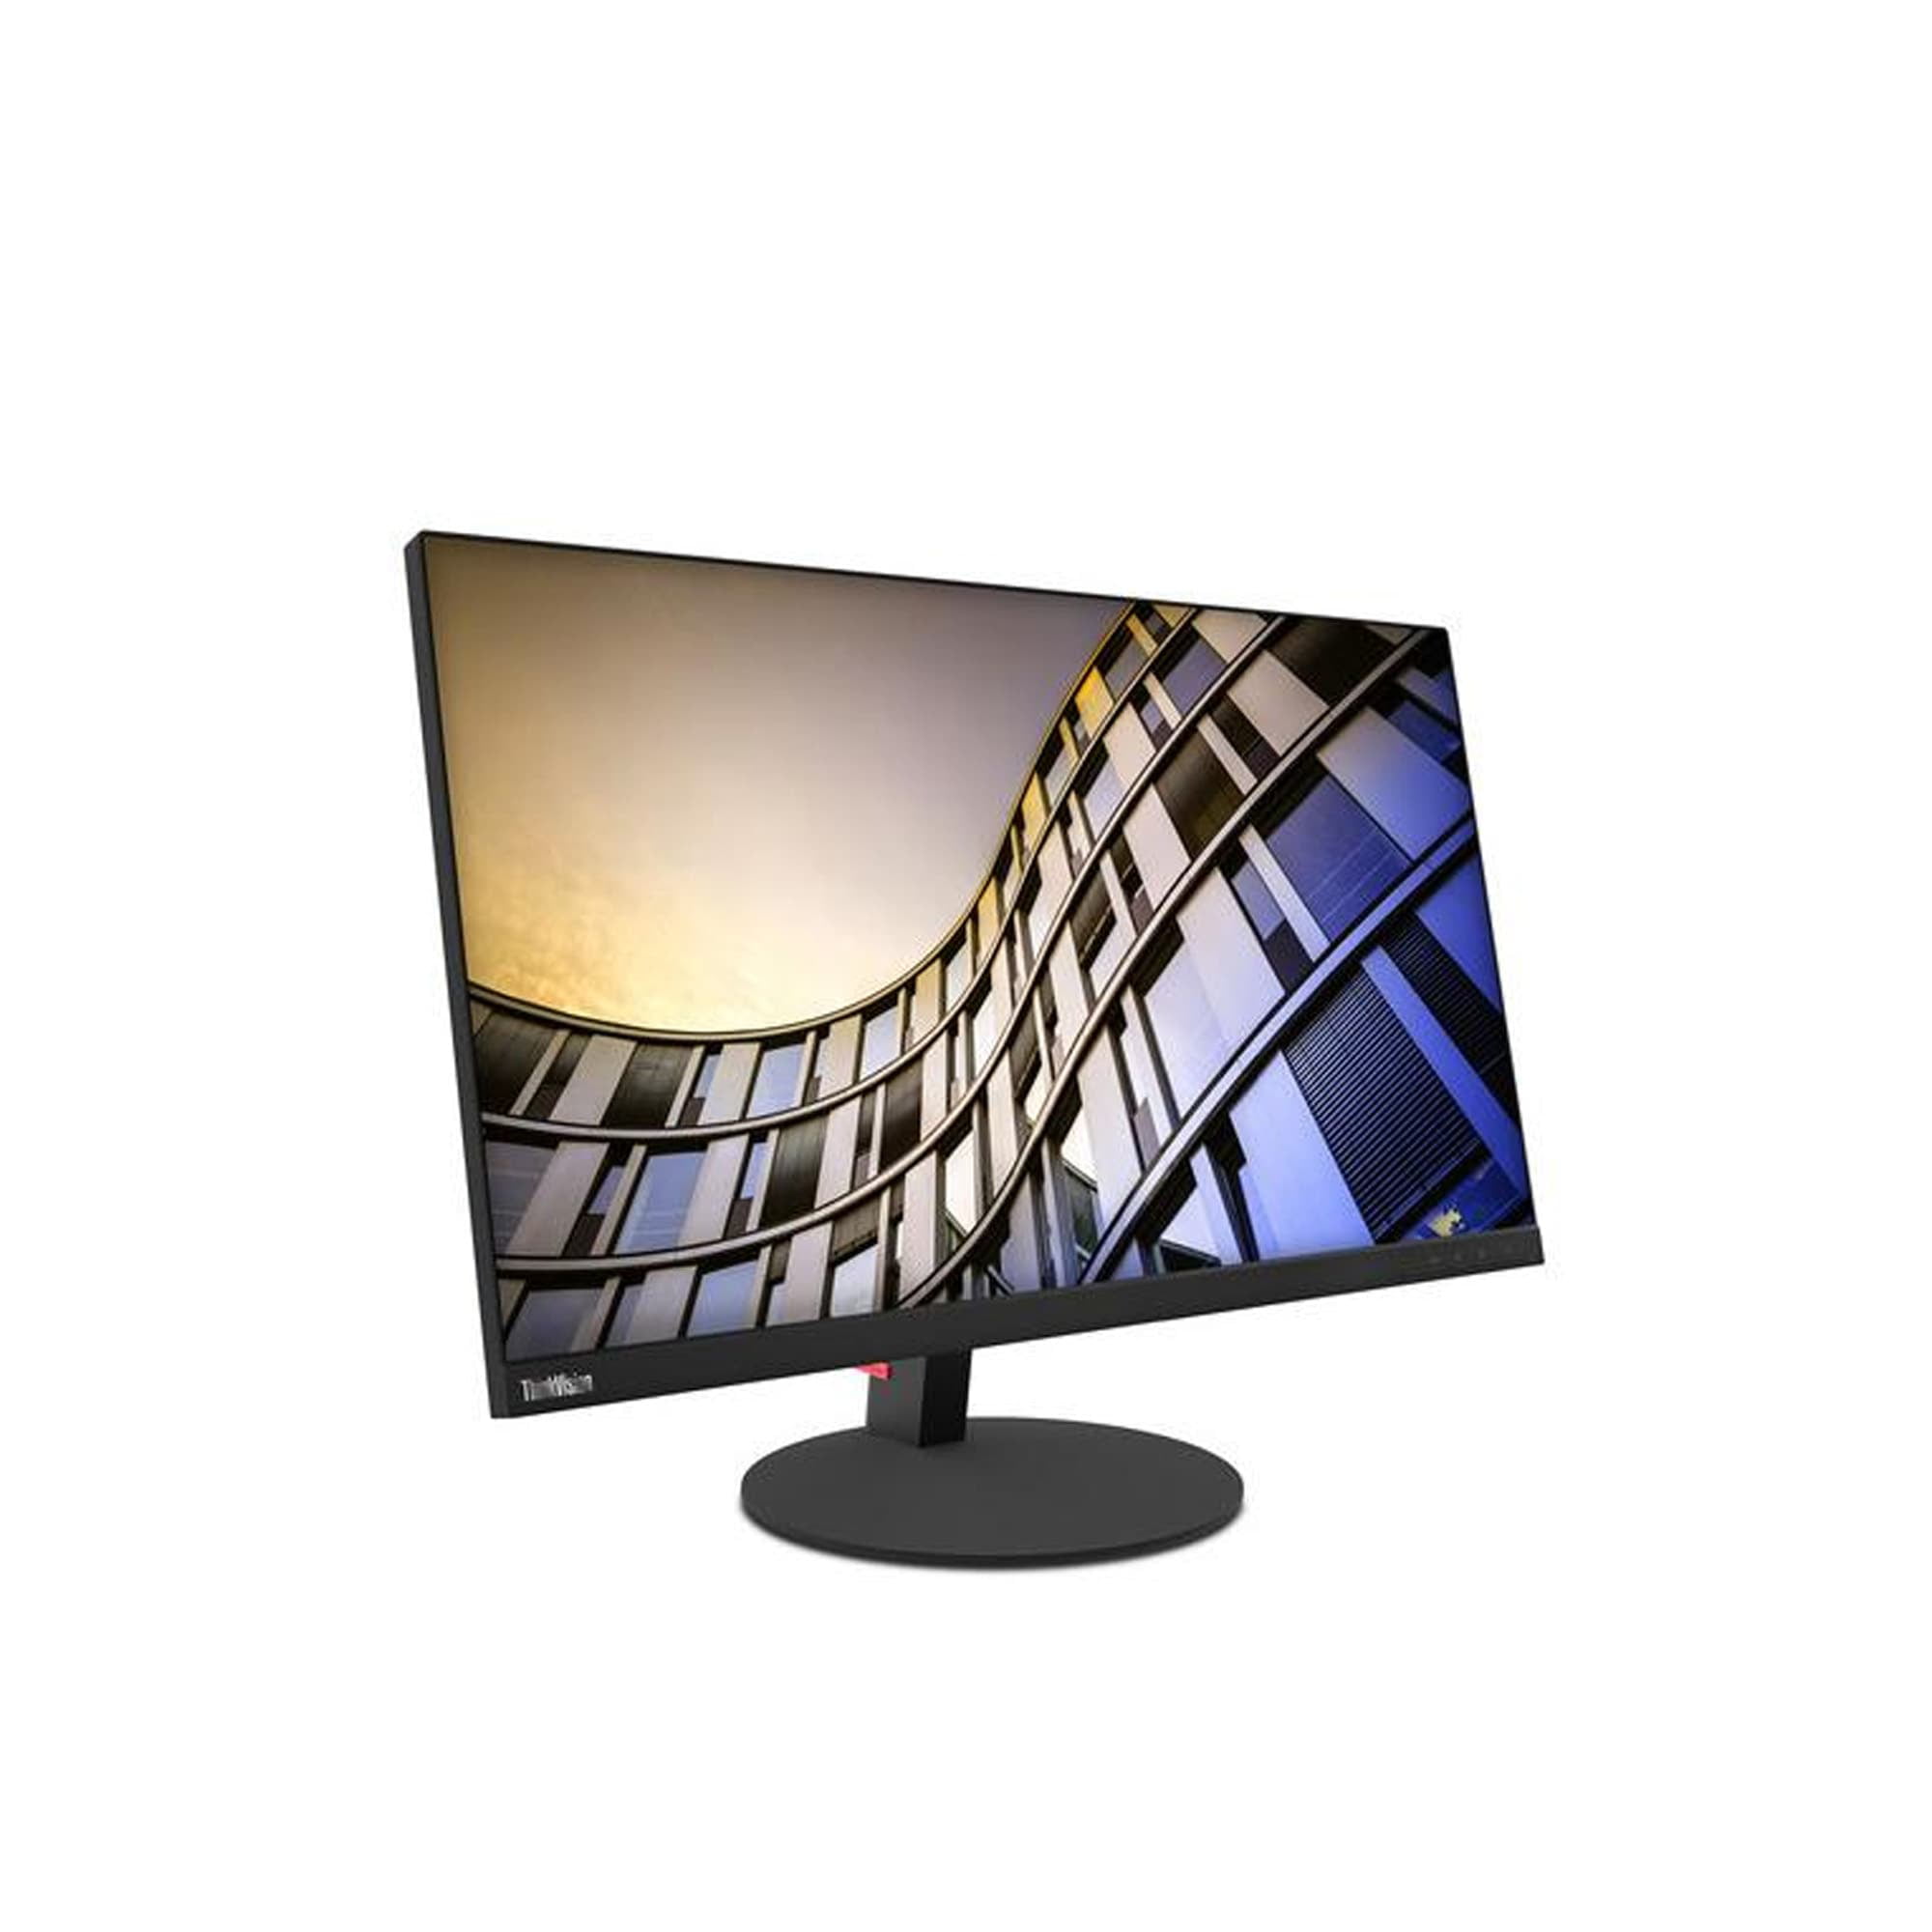 Lenovo T27p-10 27” Wide UHD Monitor with USB (4K) -